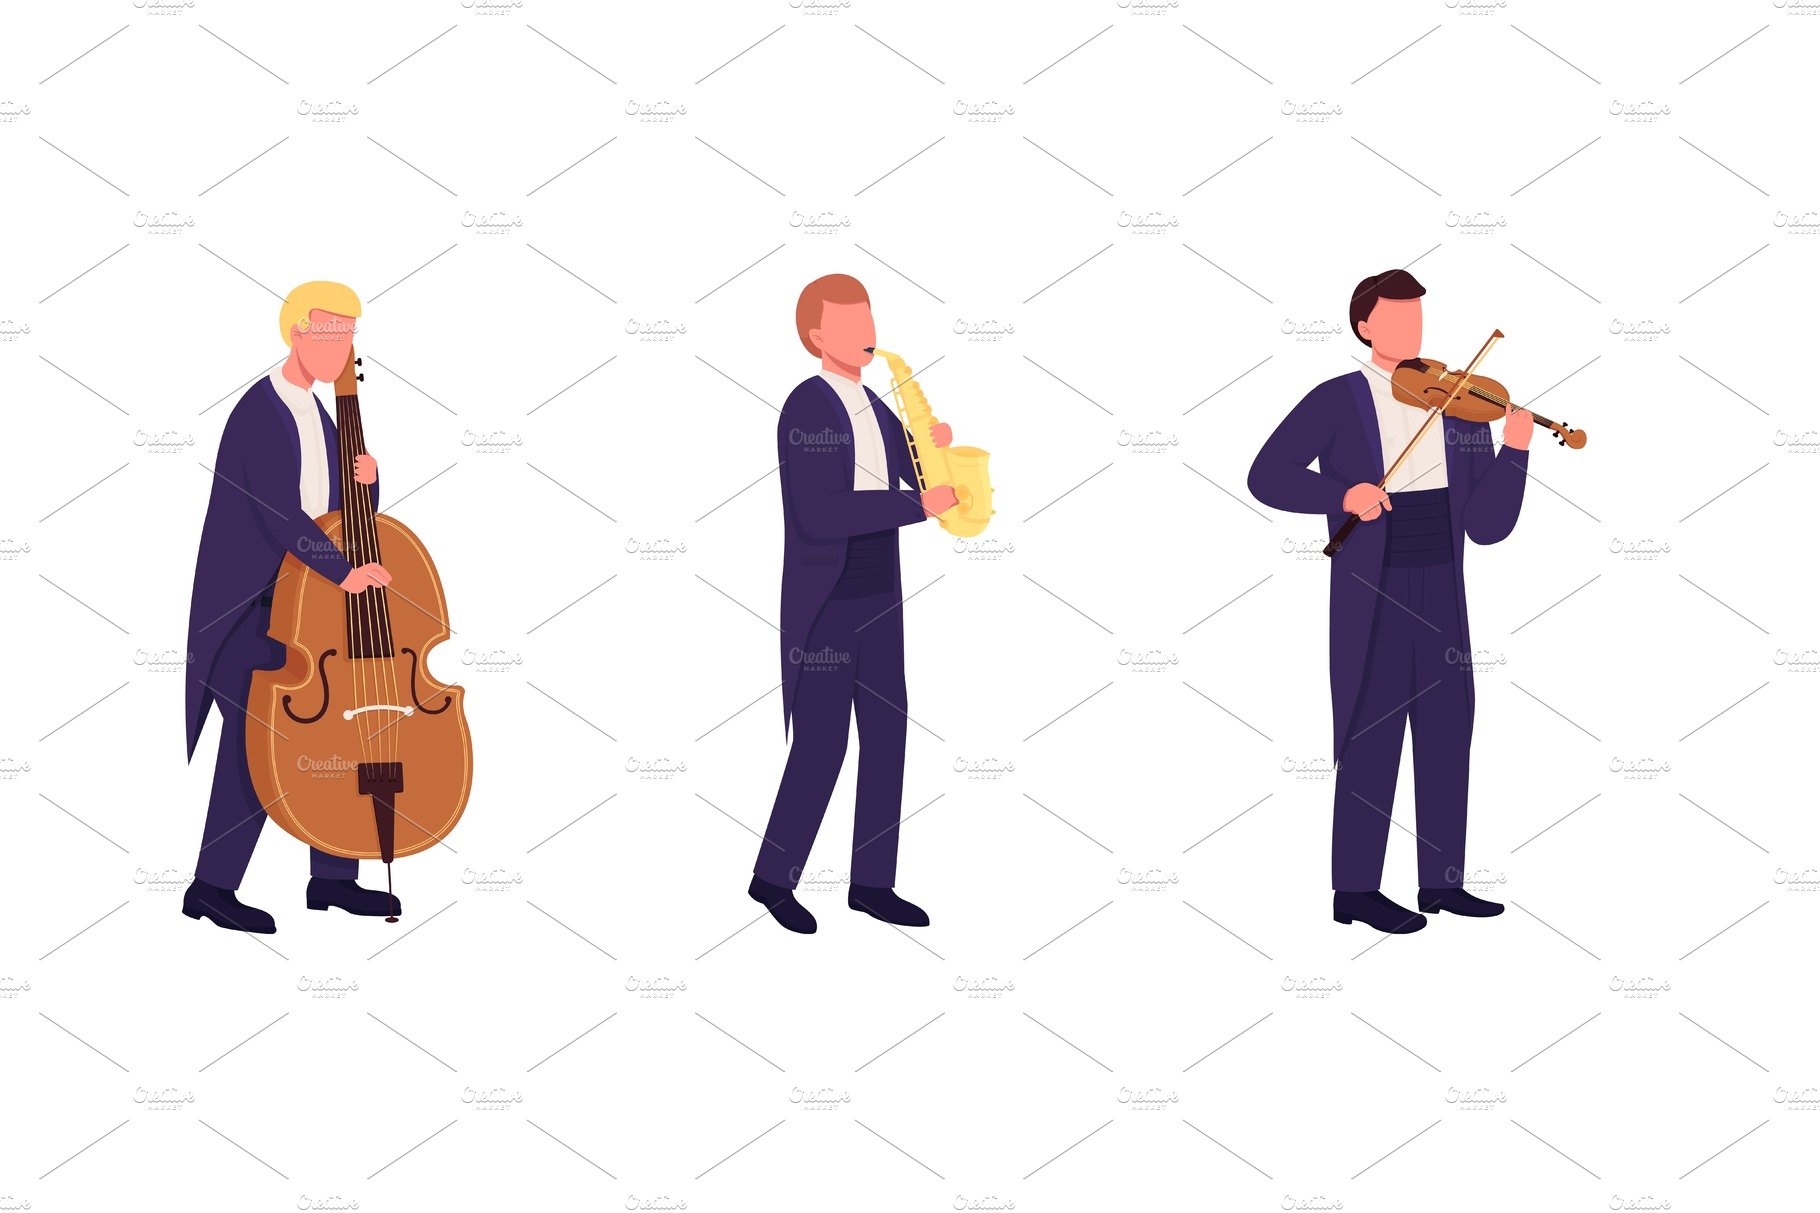 Orchestra musicians character set cover image.